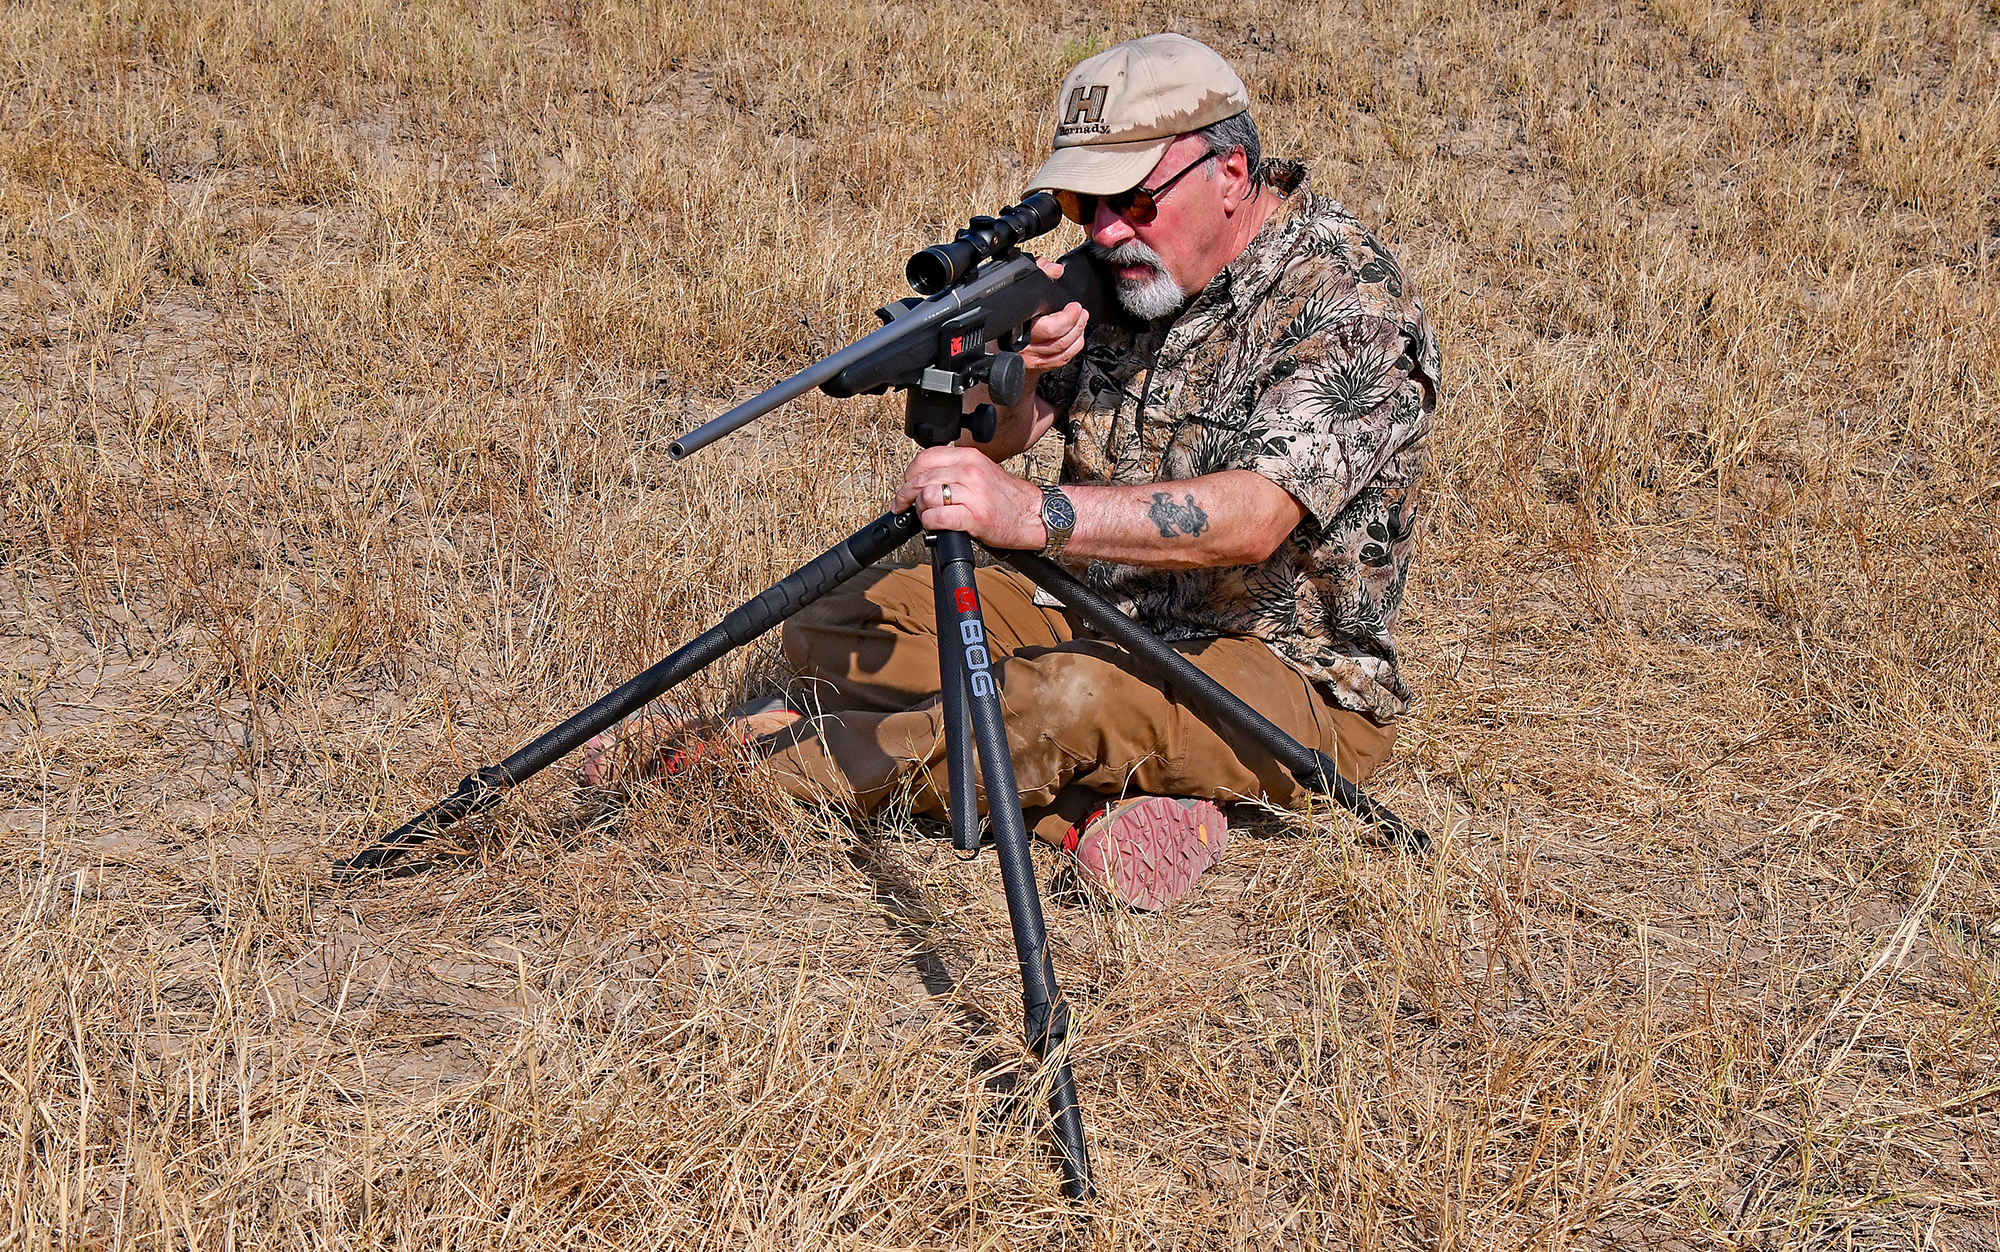 The BOG Deathgrip Sherpa is a lightweight option for hunters who sit or kneel to shoot.